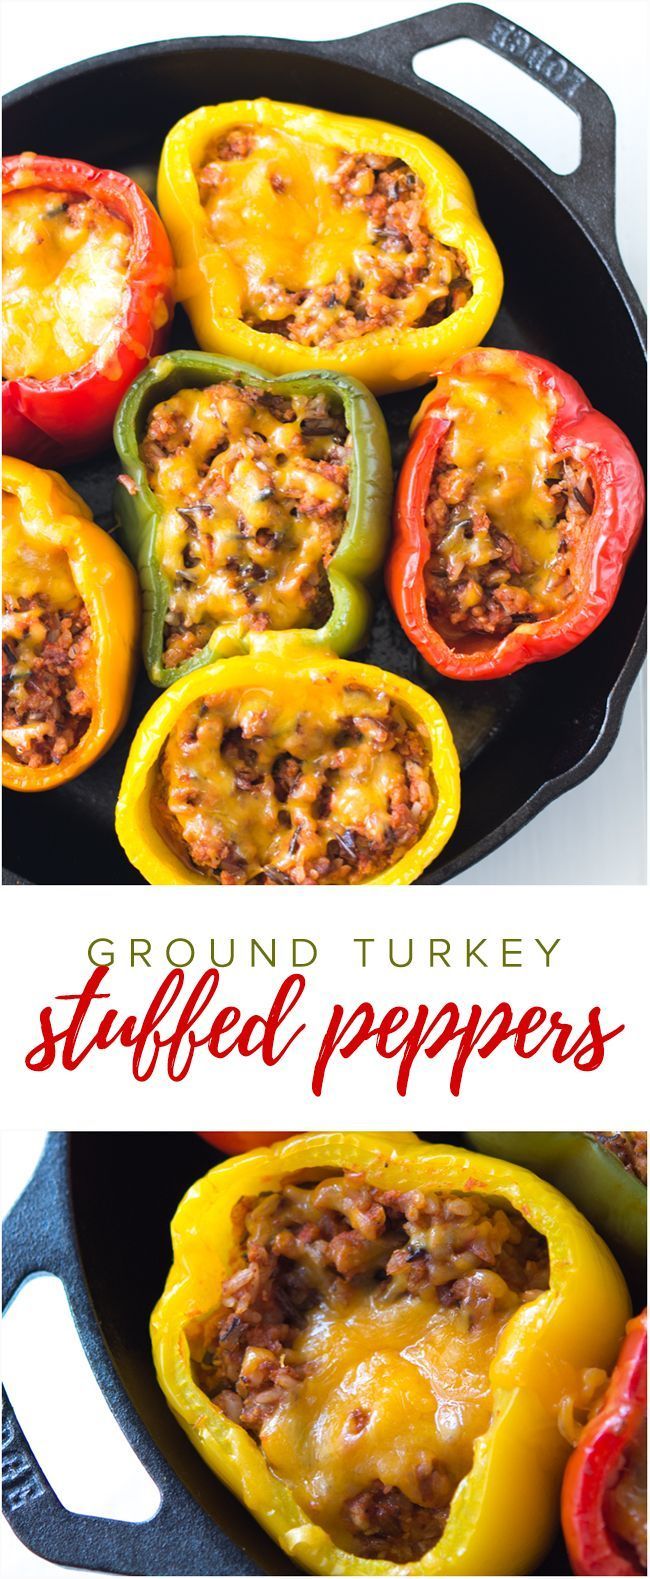 Ground Turkey Stuffed Peppers Recipe – This no-fuss stuffed peppers recipe is the perfect easy family dinner recipe. If you prefer